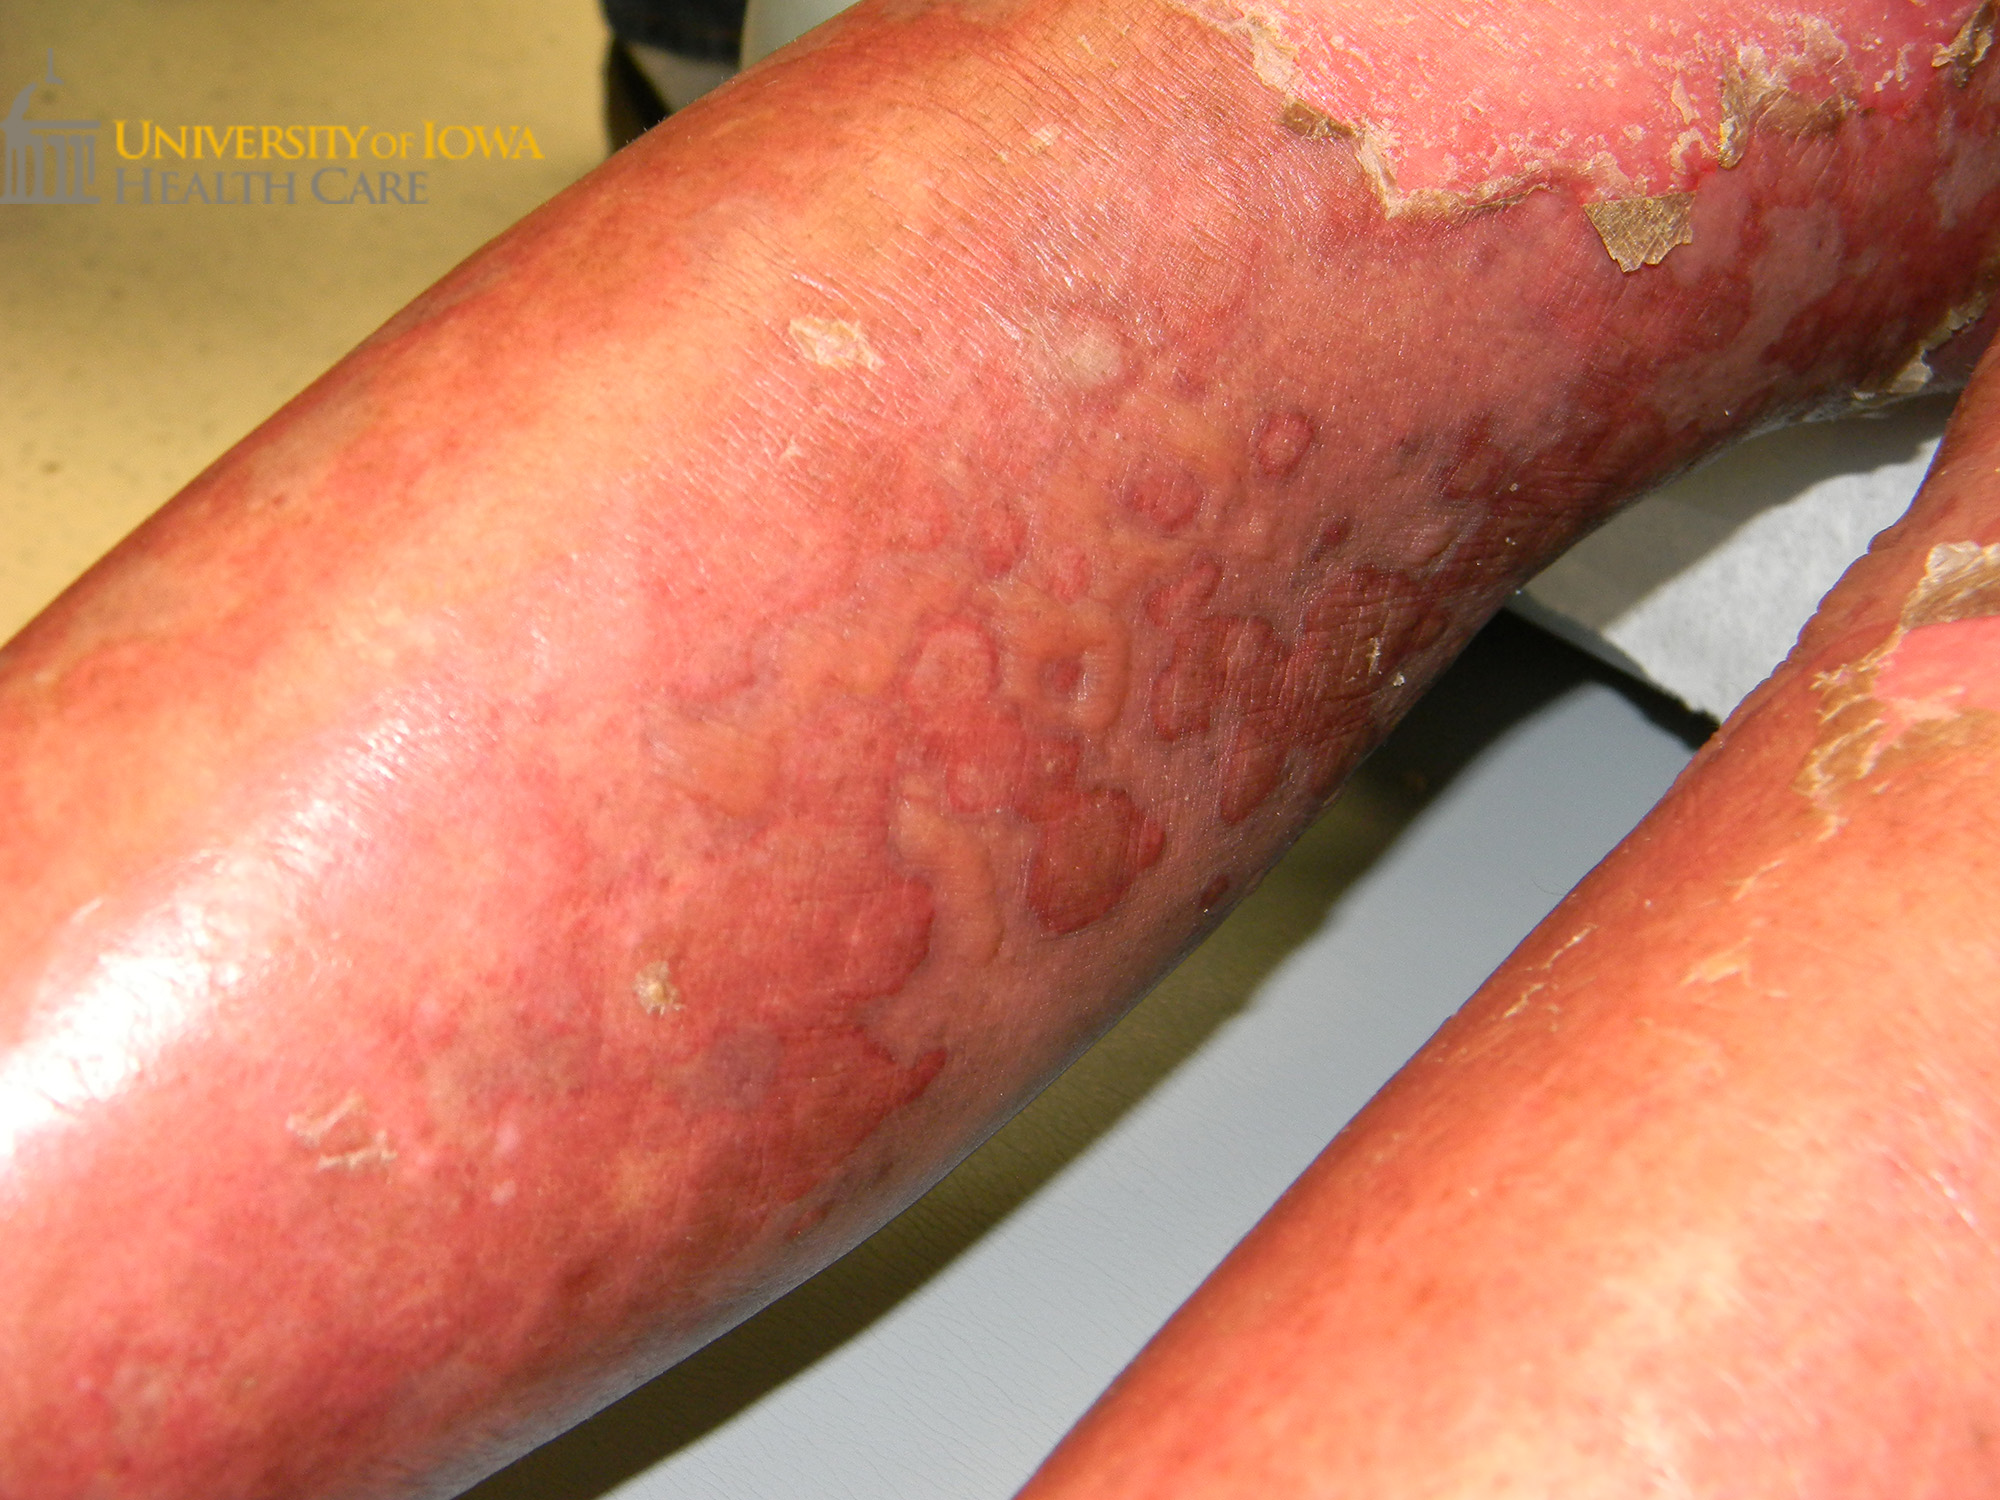 Flaccid bulla with surrounding erythema and focal area of superfical erosion and scaling on the leg. (click images for higher resolution).